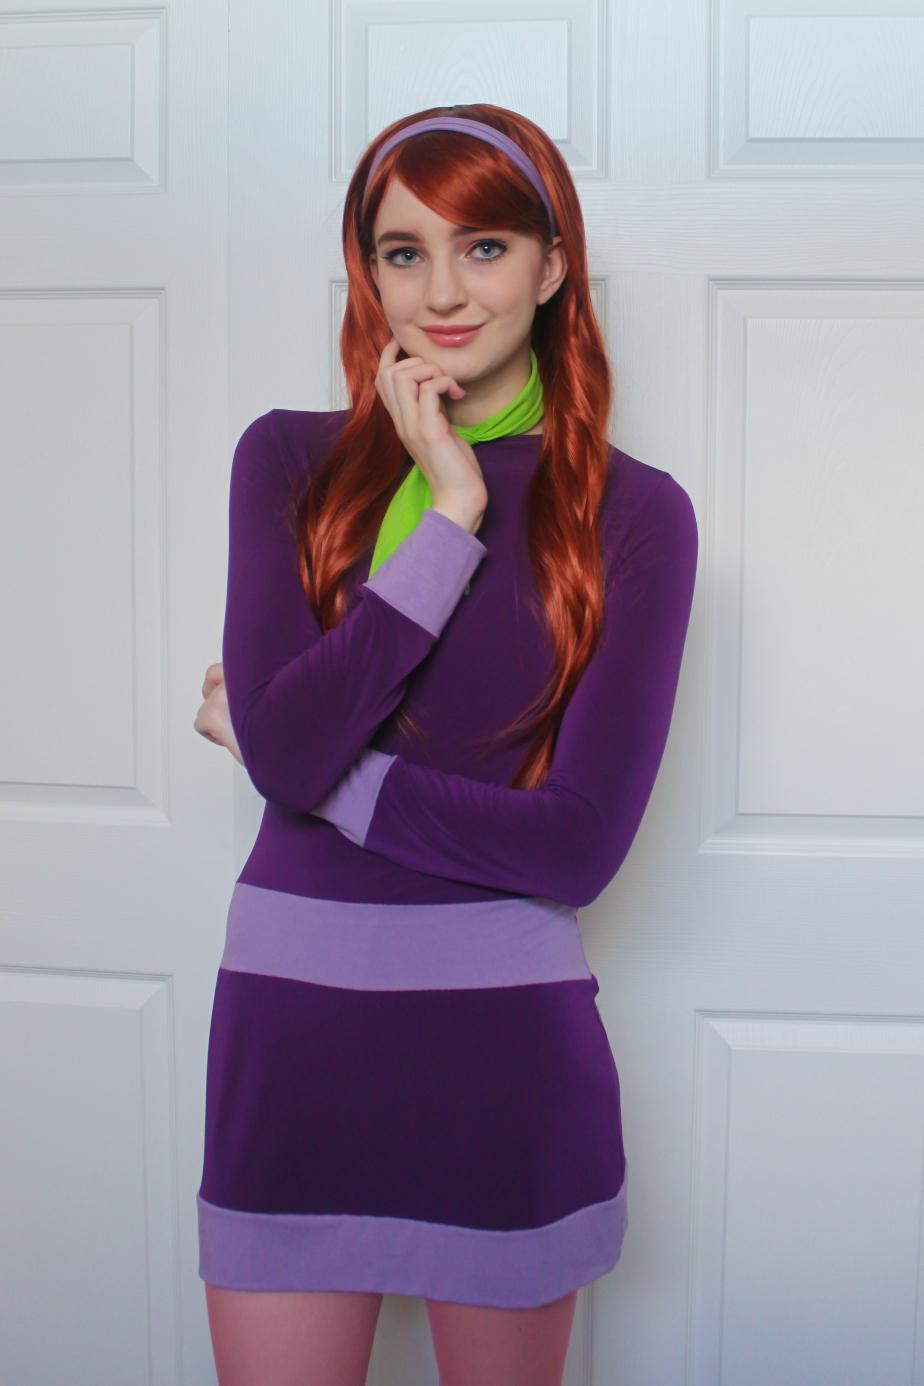 70+ Hot Pictures Of Daphne Blake From Scooby Doo Which Are Sure to Catch Your Attention 44